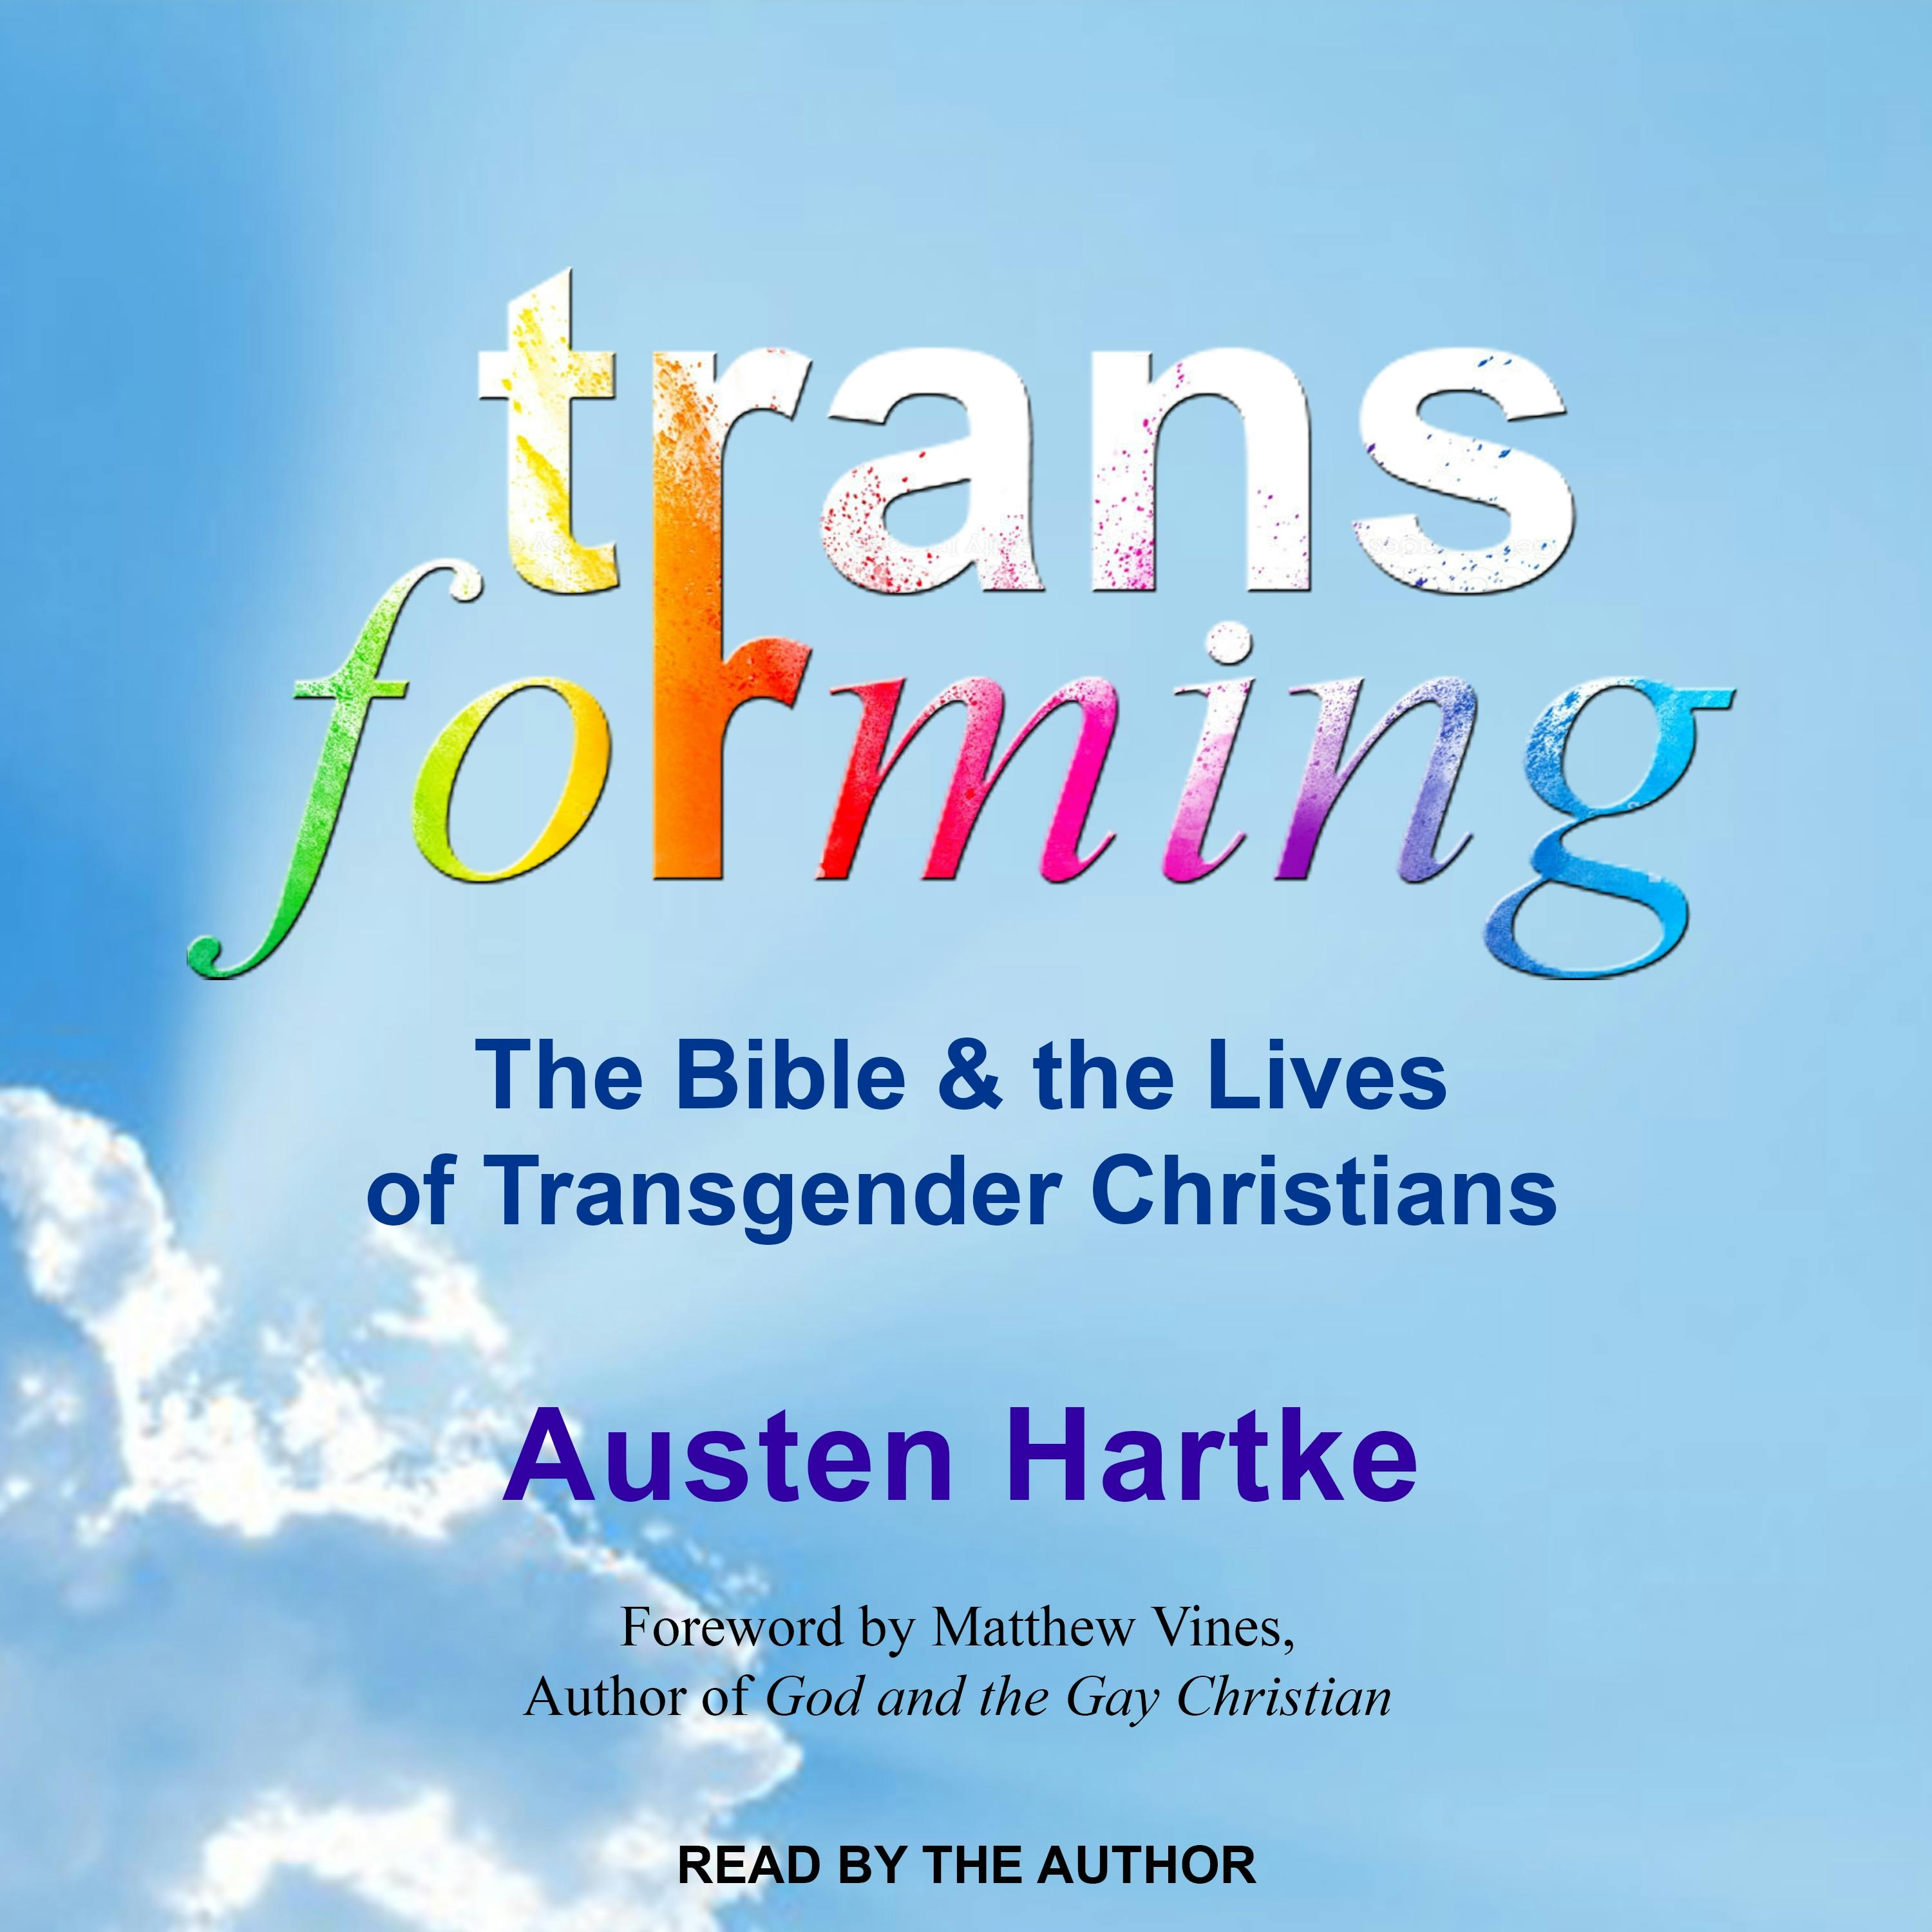 Transforming: The Bible and the Lives of Transgender Christians - Austen Hartke